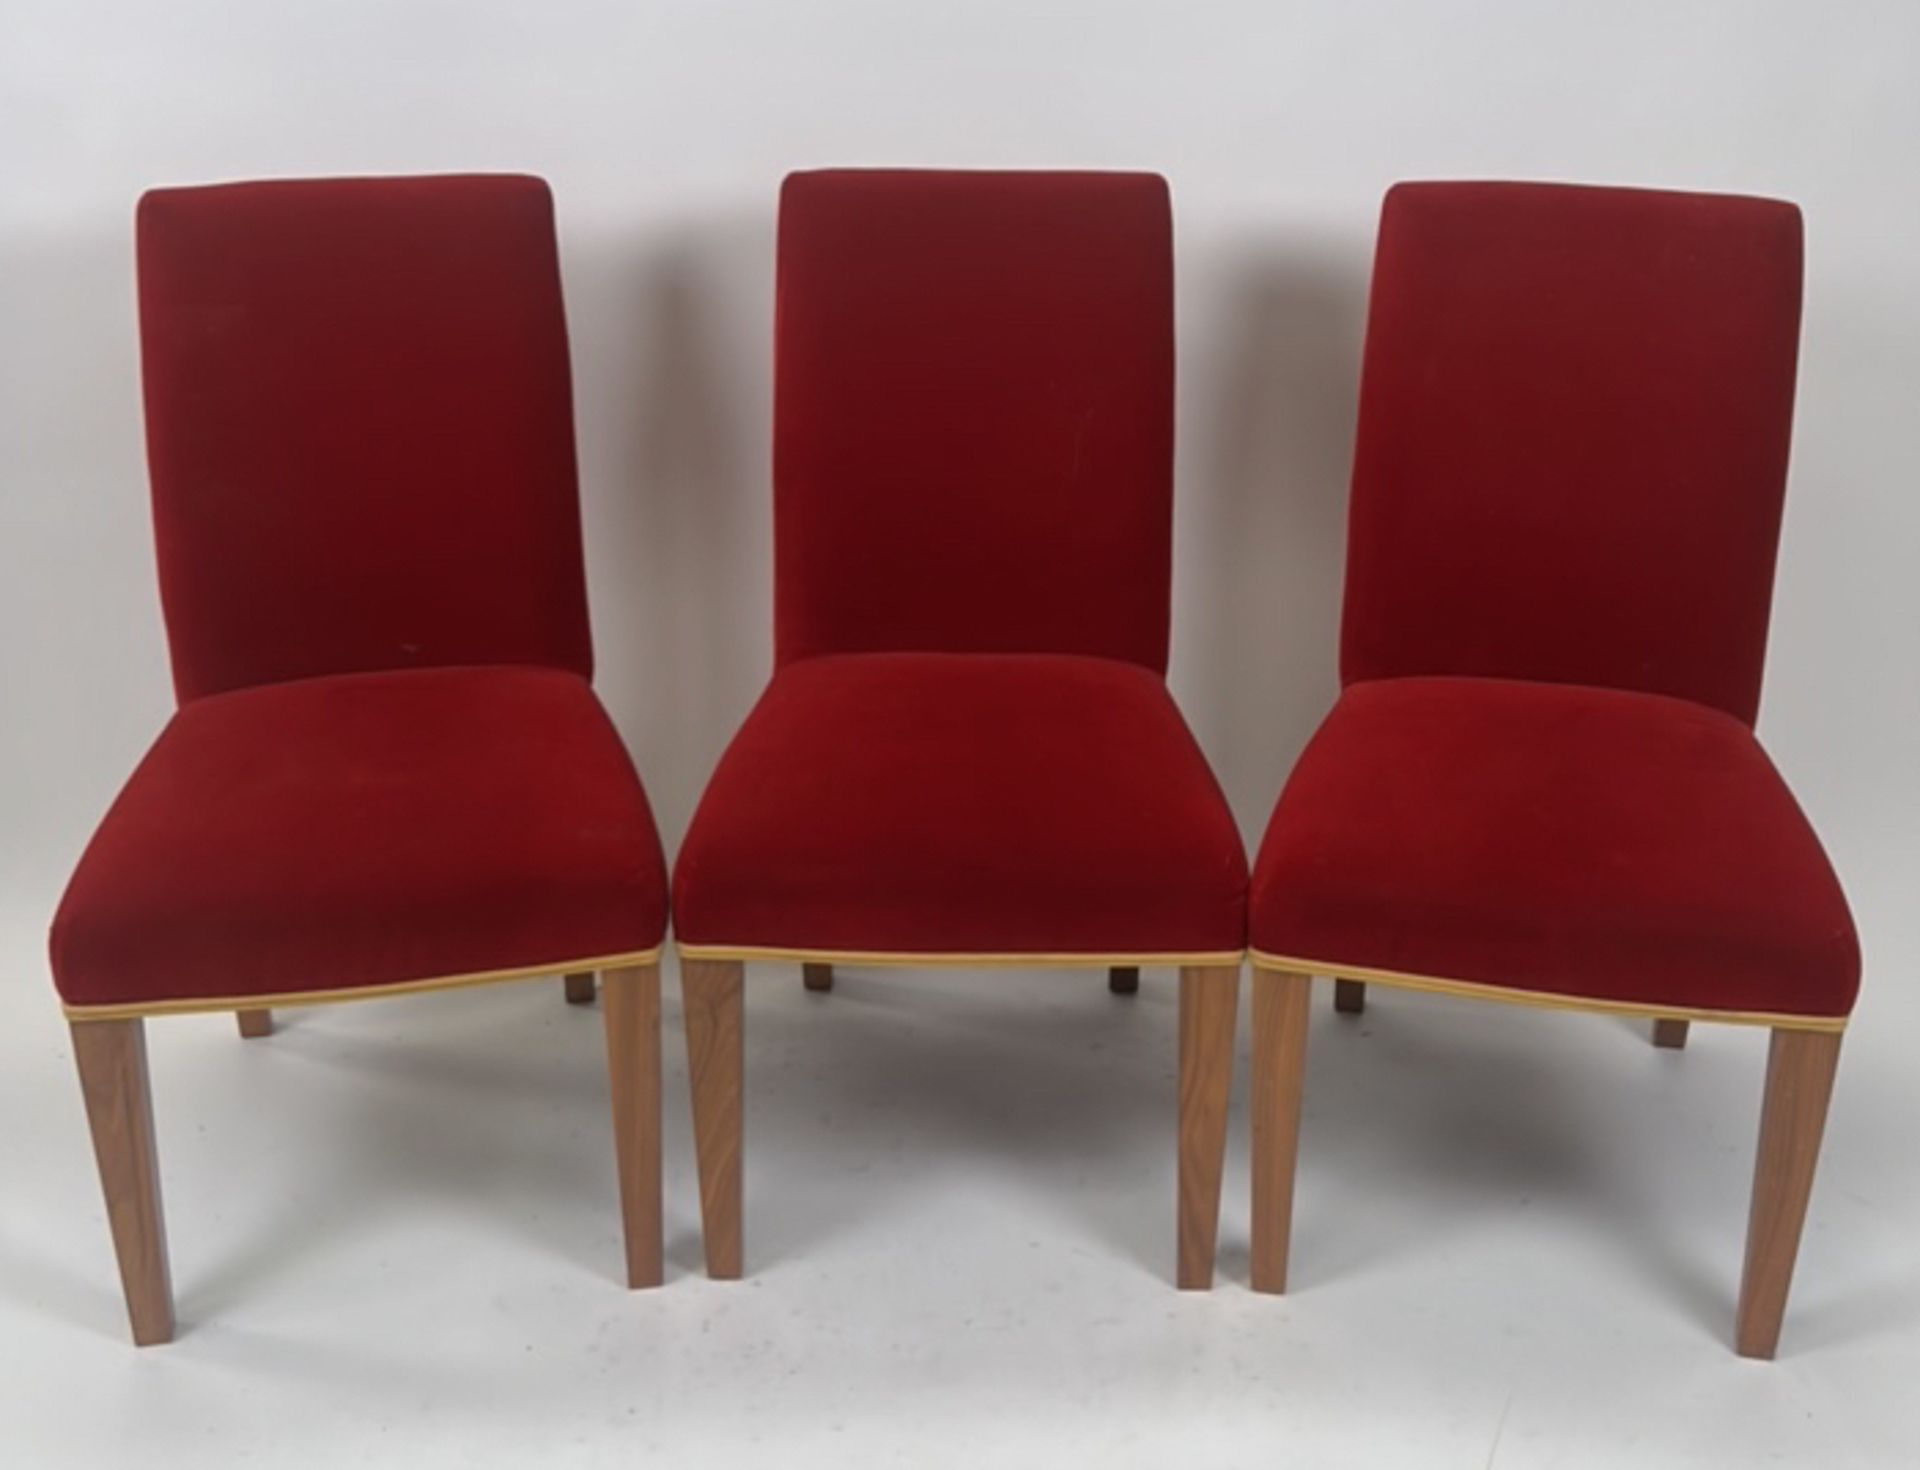 Trio of David Linley Dining Chairs